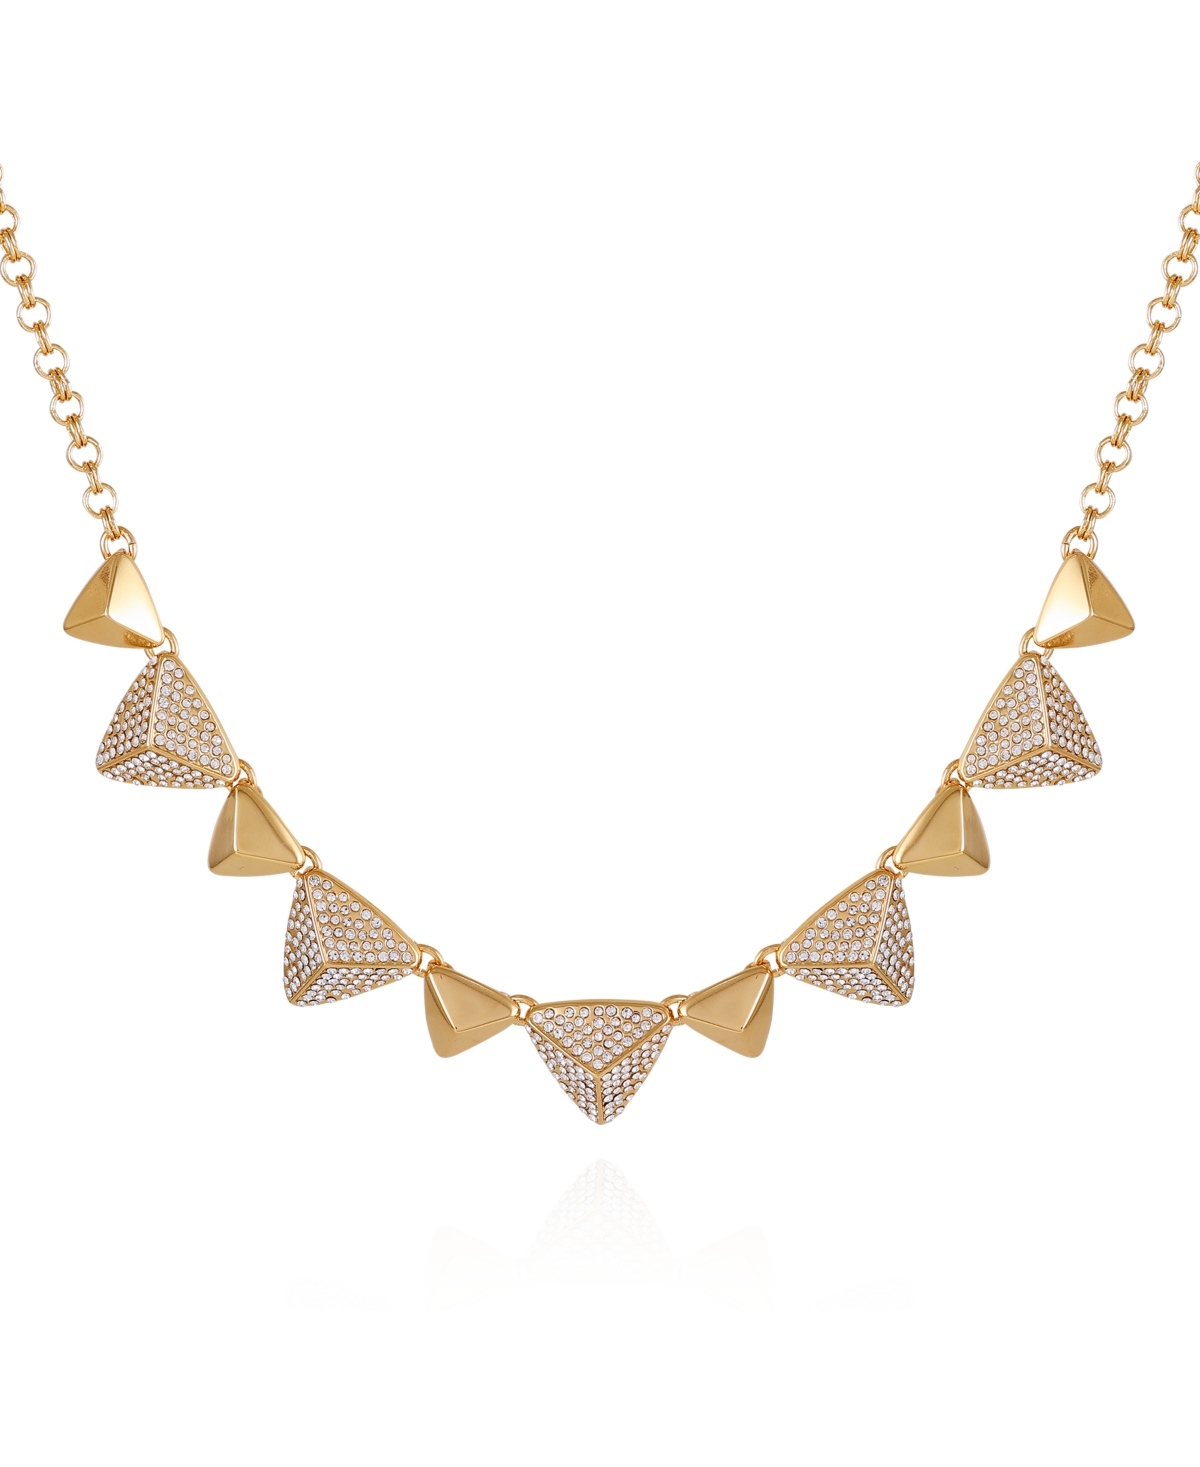 Gold-Tone Pave Glass Stone Statement Necklace - Gold